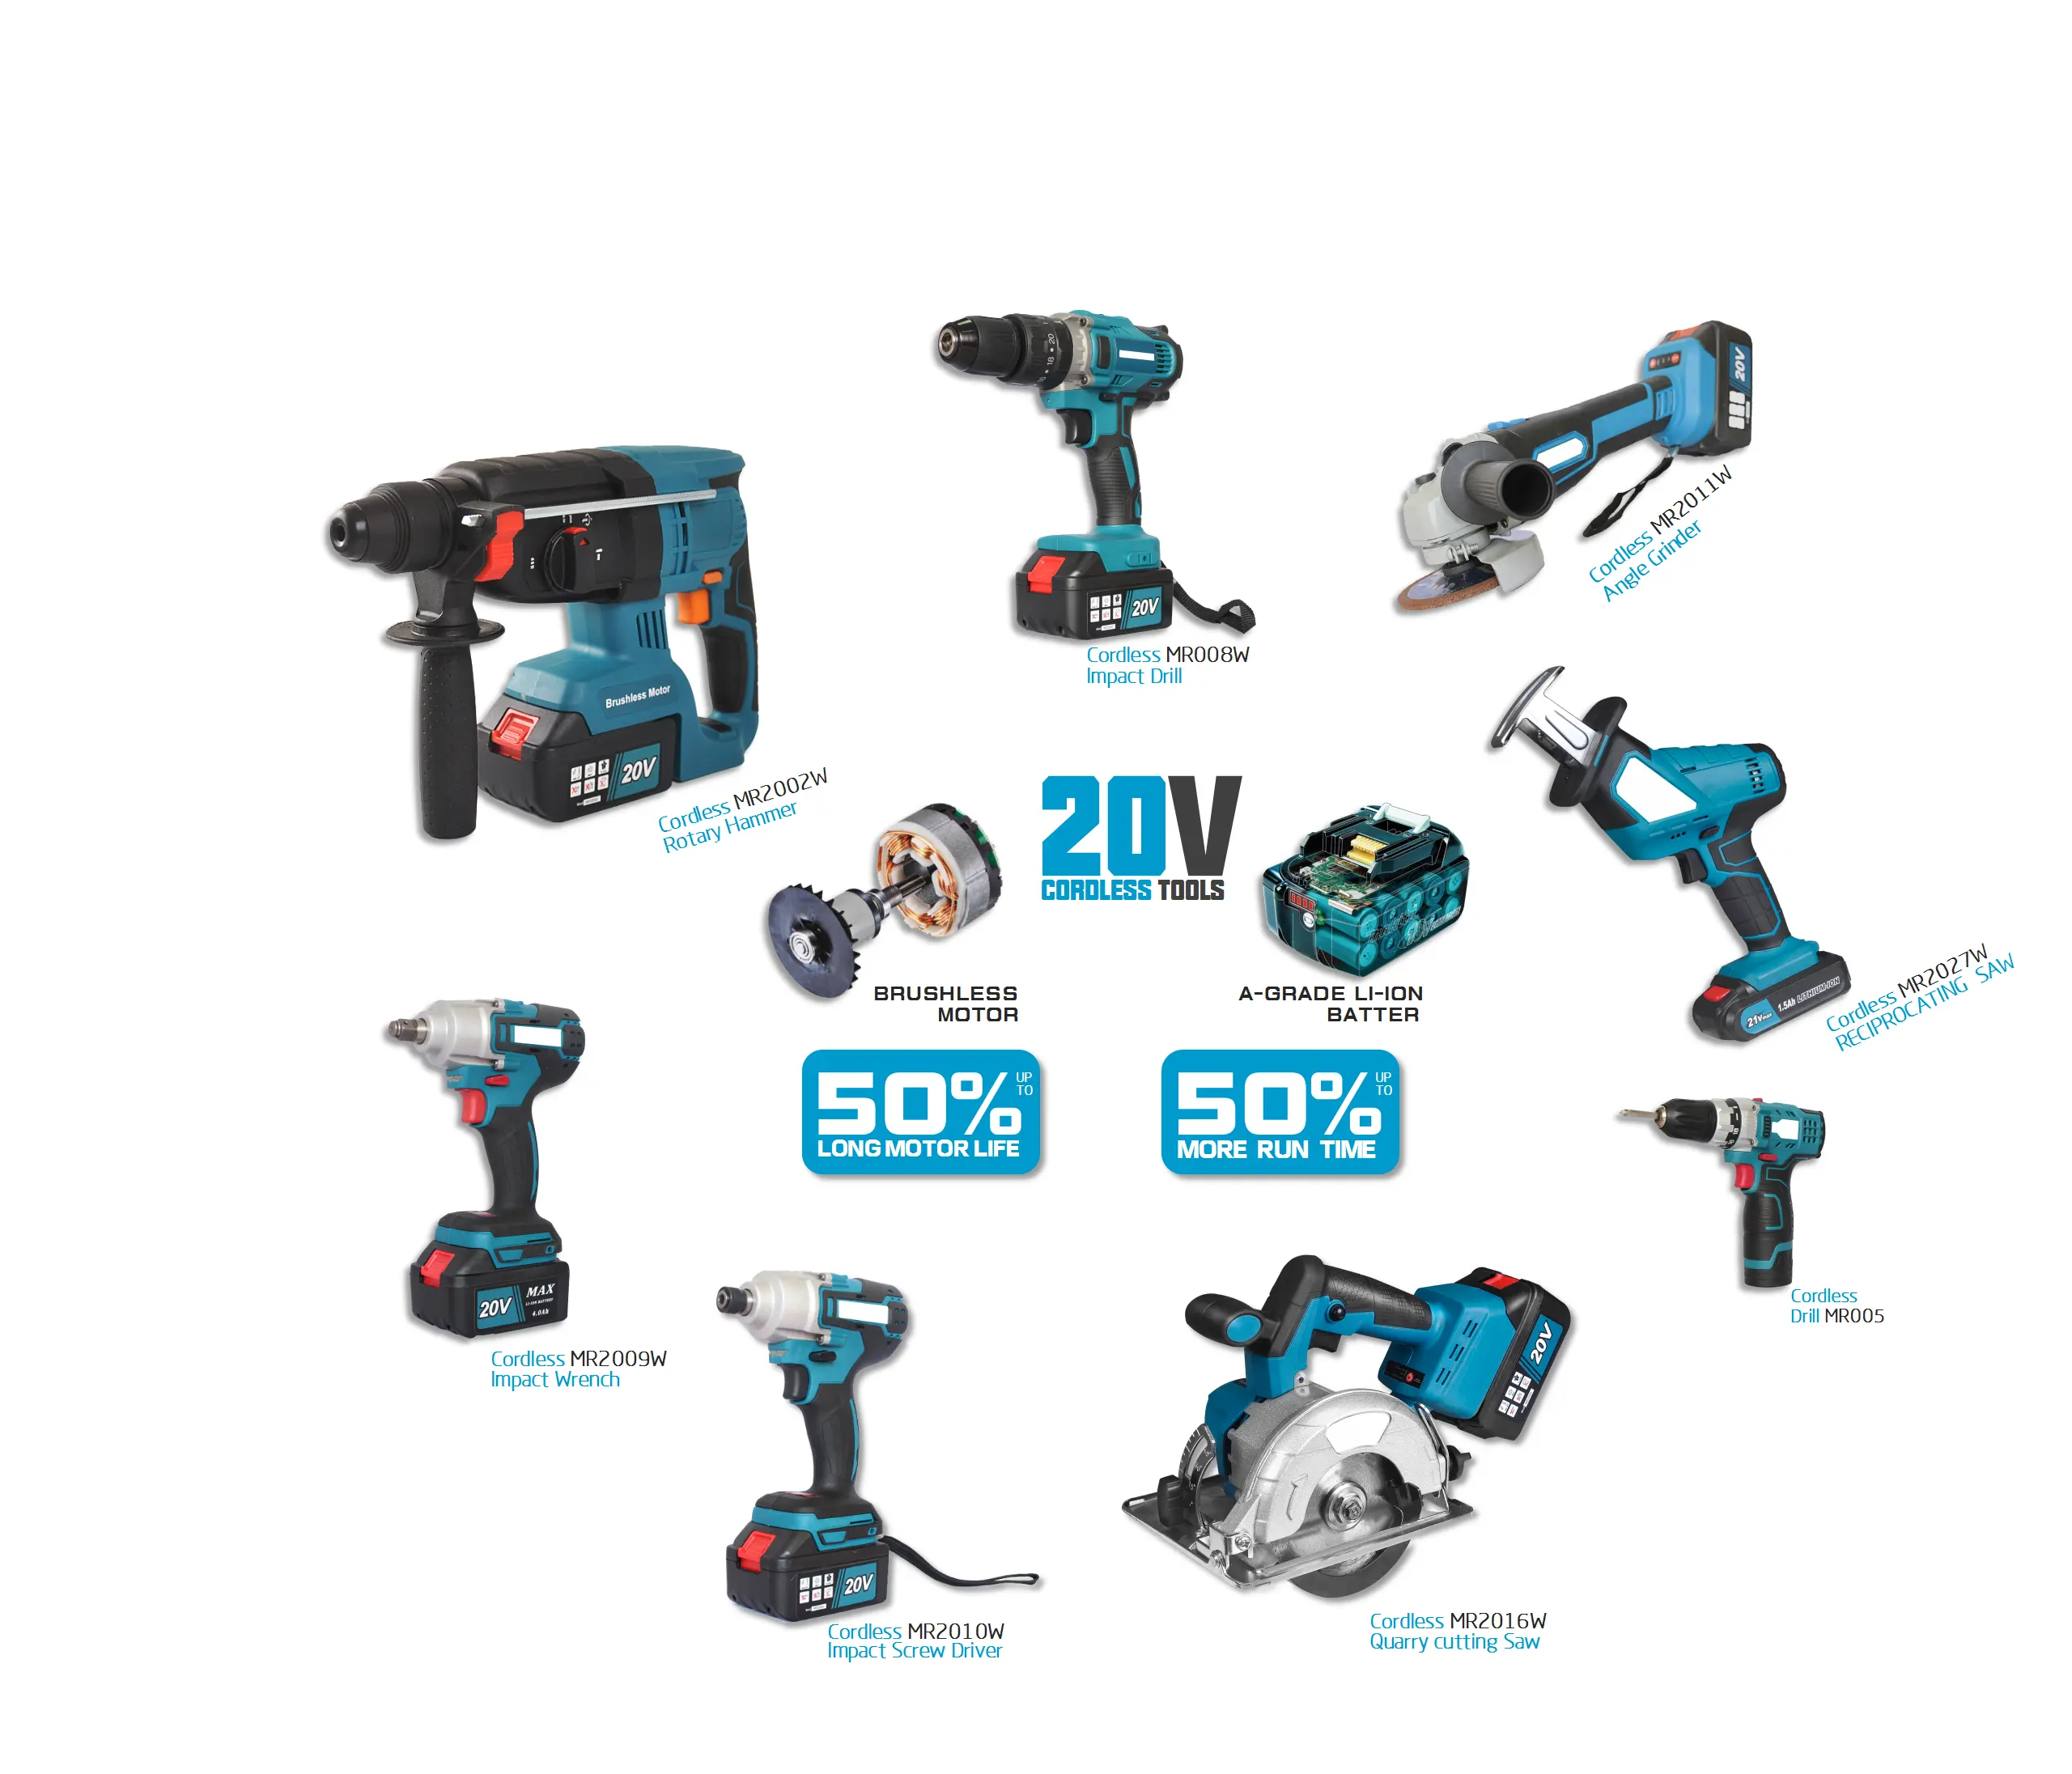 Customized Professional Impact Drill 13mm Power Action 750W Bosch Power Tools with Lowest Price for Crafts